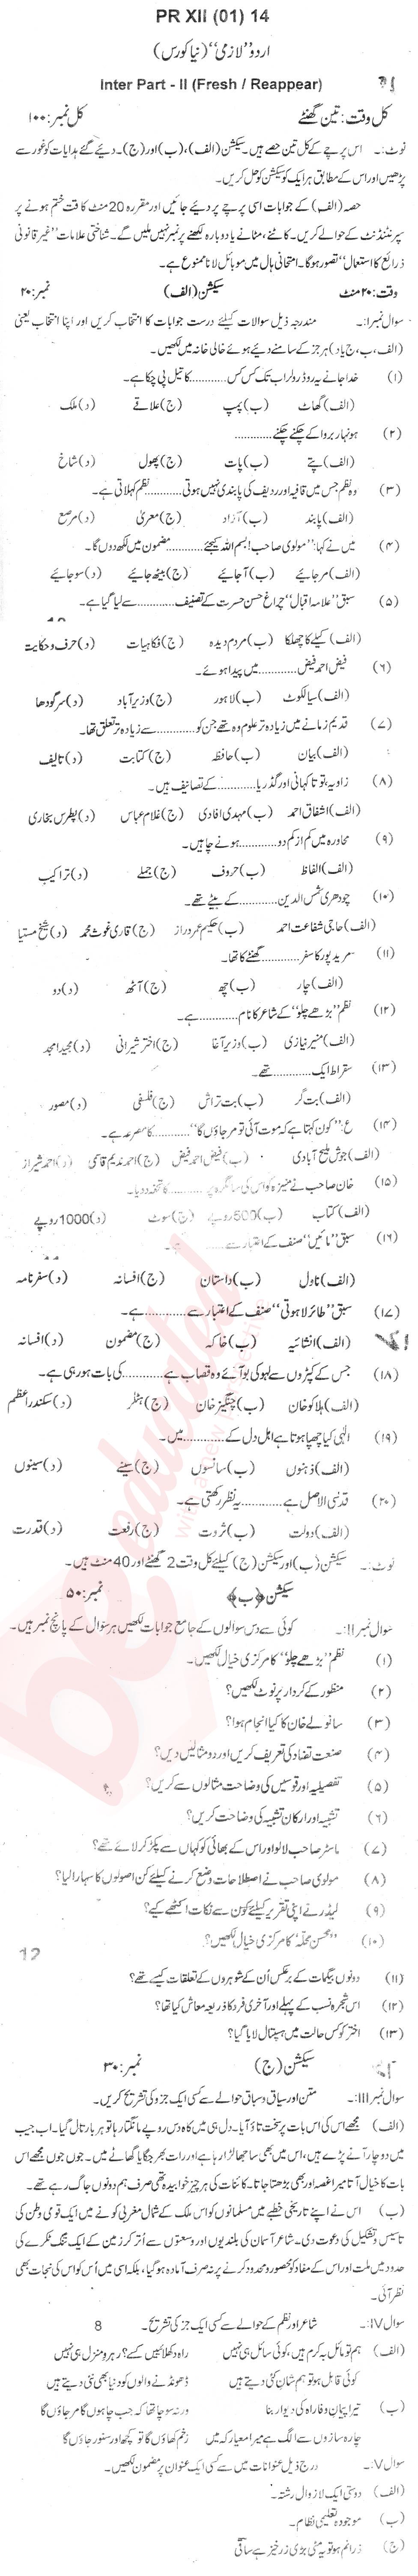 Urdu 12th class Past Paper Group 1 BISE Abbottabad 2014